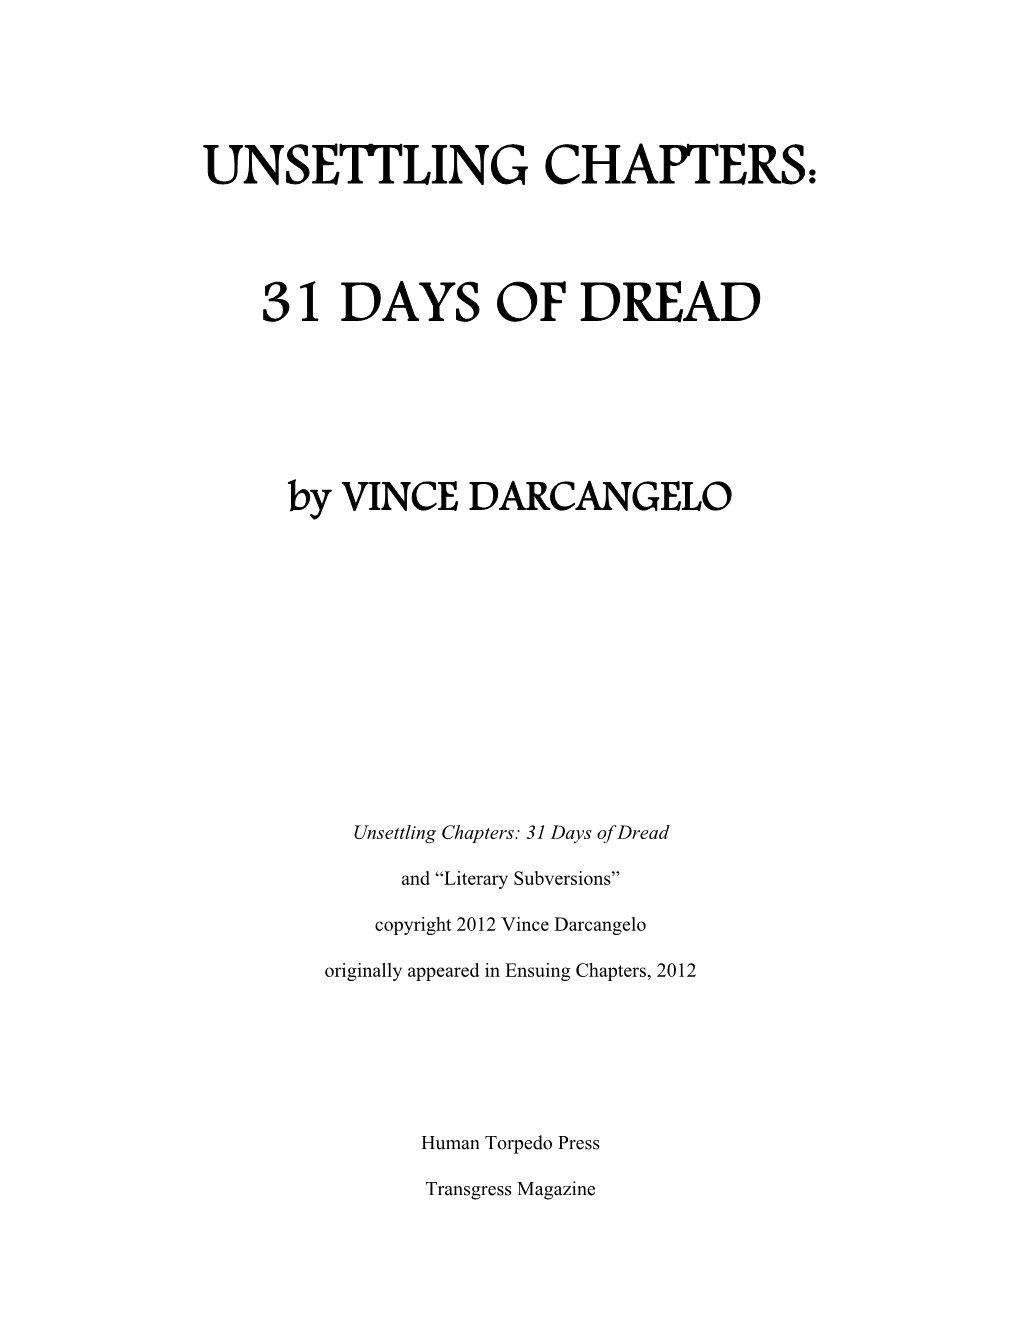 Unsettling Chapters: 31 Days of Dread